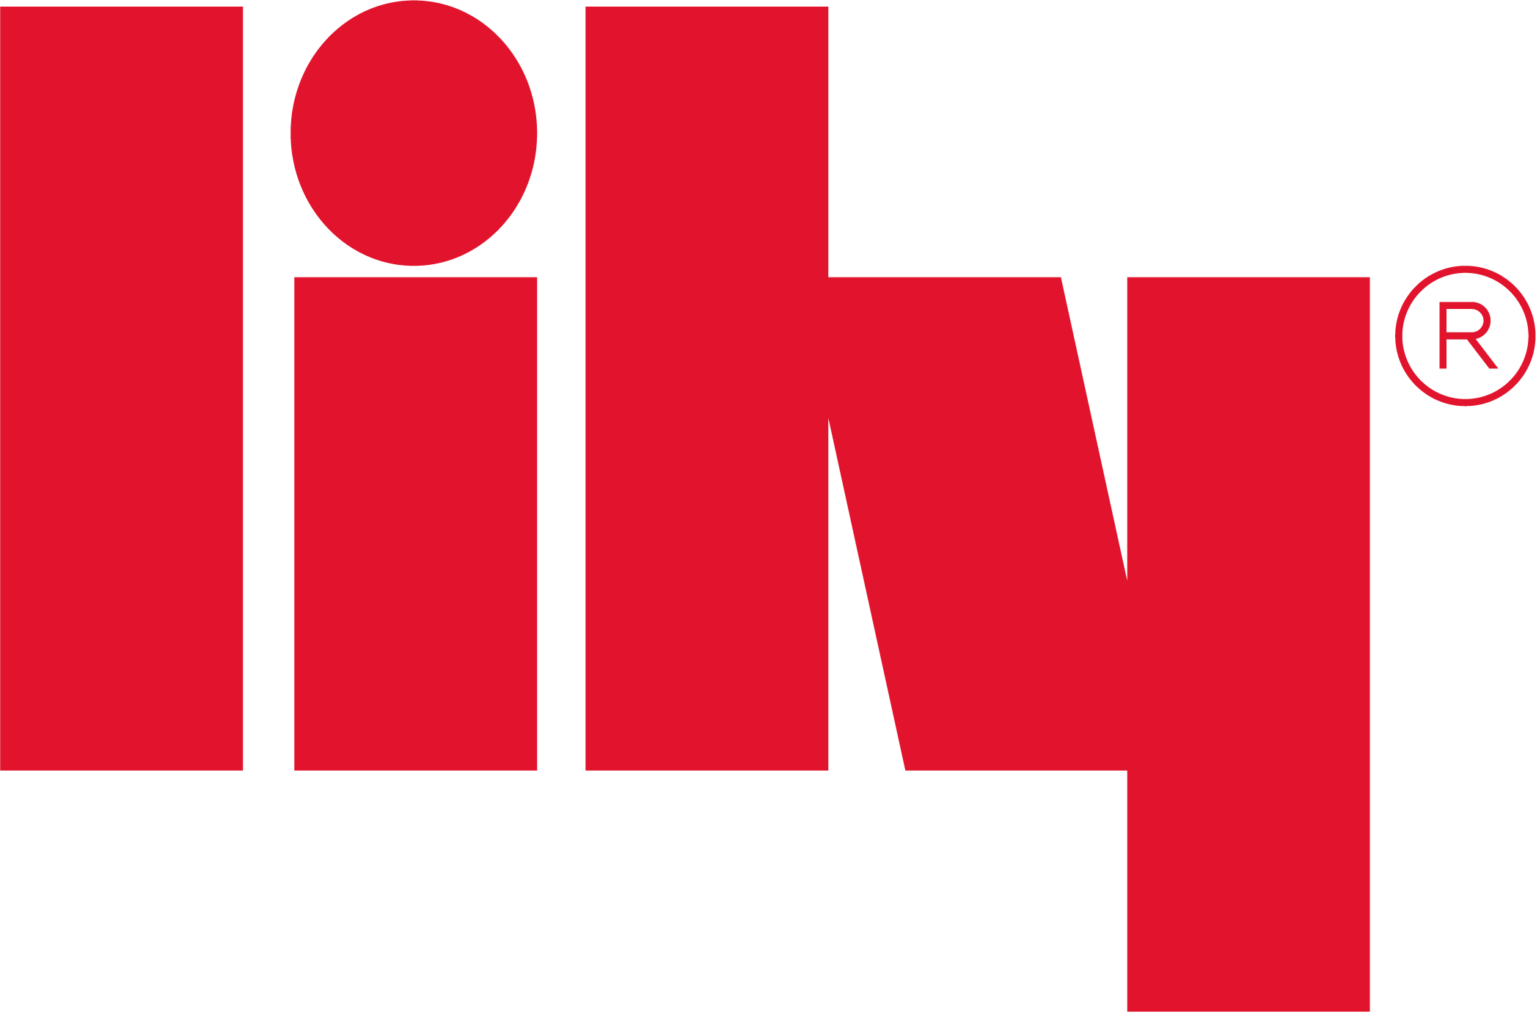 https://www.lily.com/wp-content/uploads/2020/06/Lily-Logo-1536x1012.png